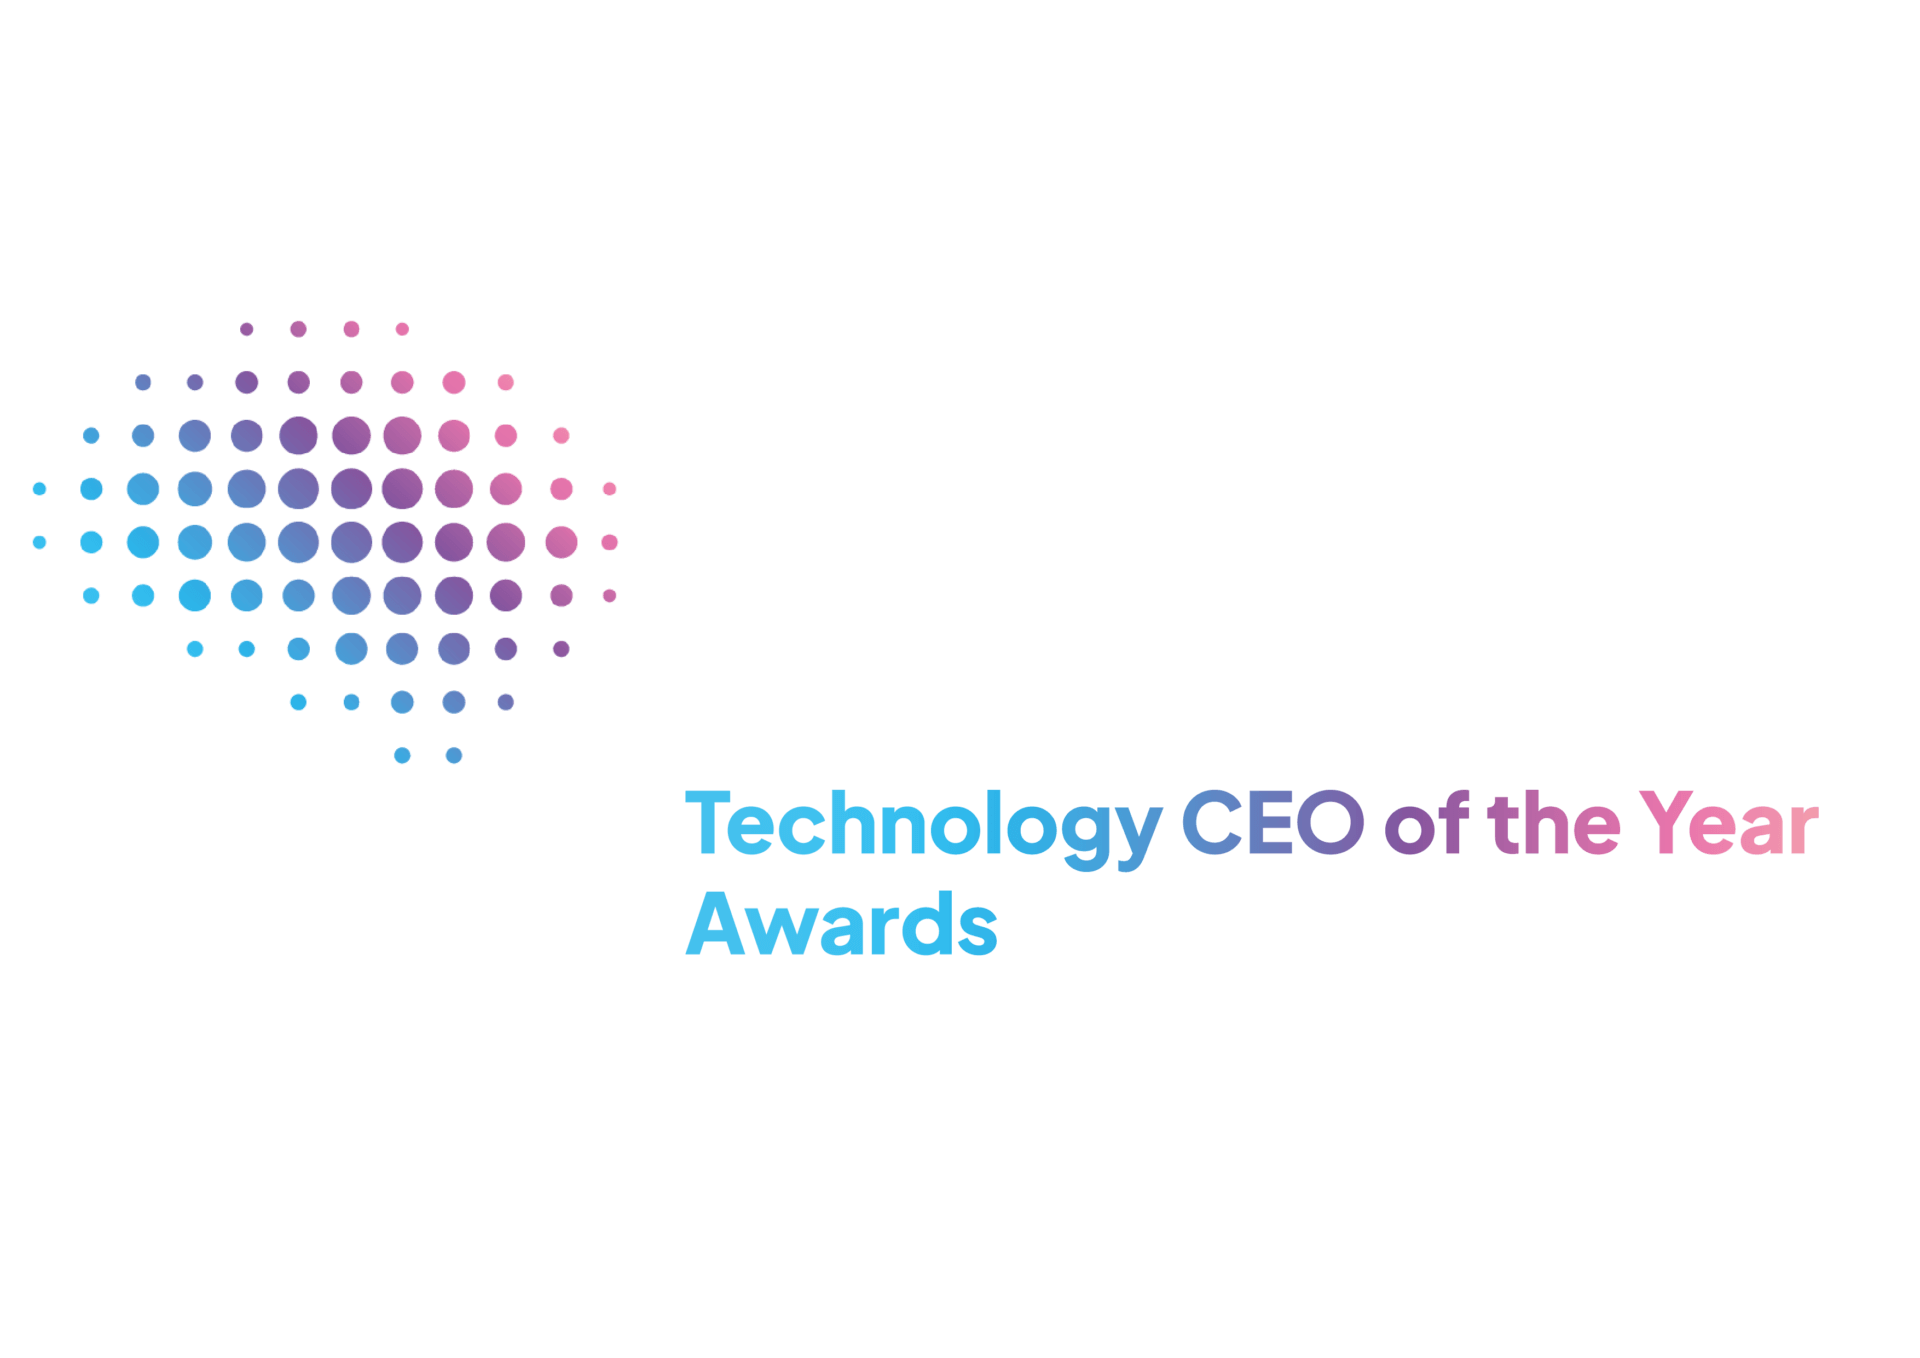 Technology CEO of the Year